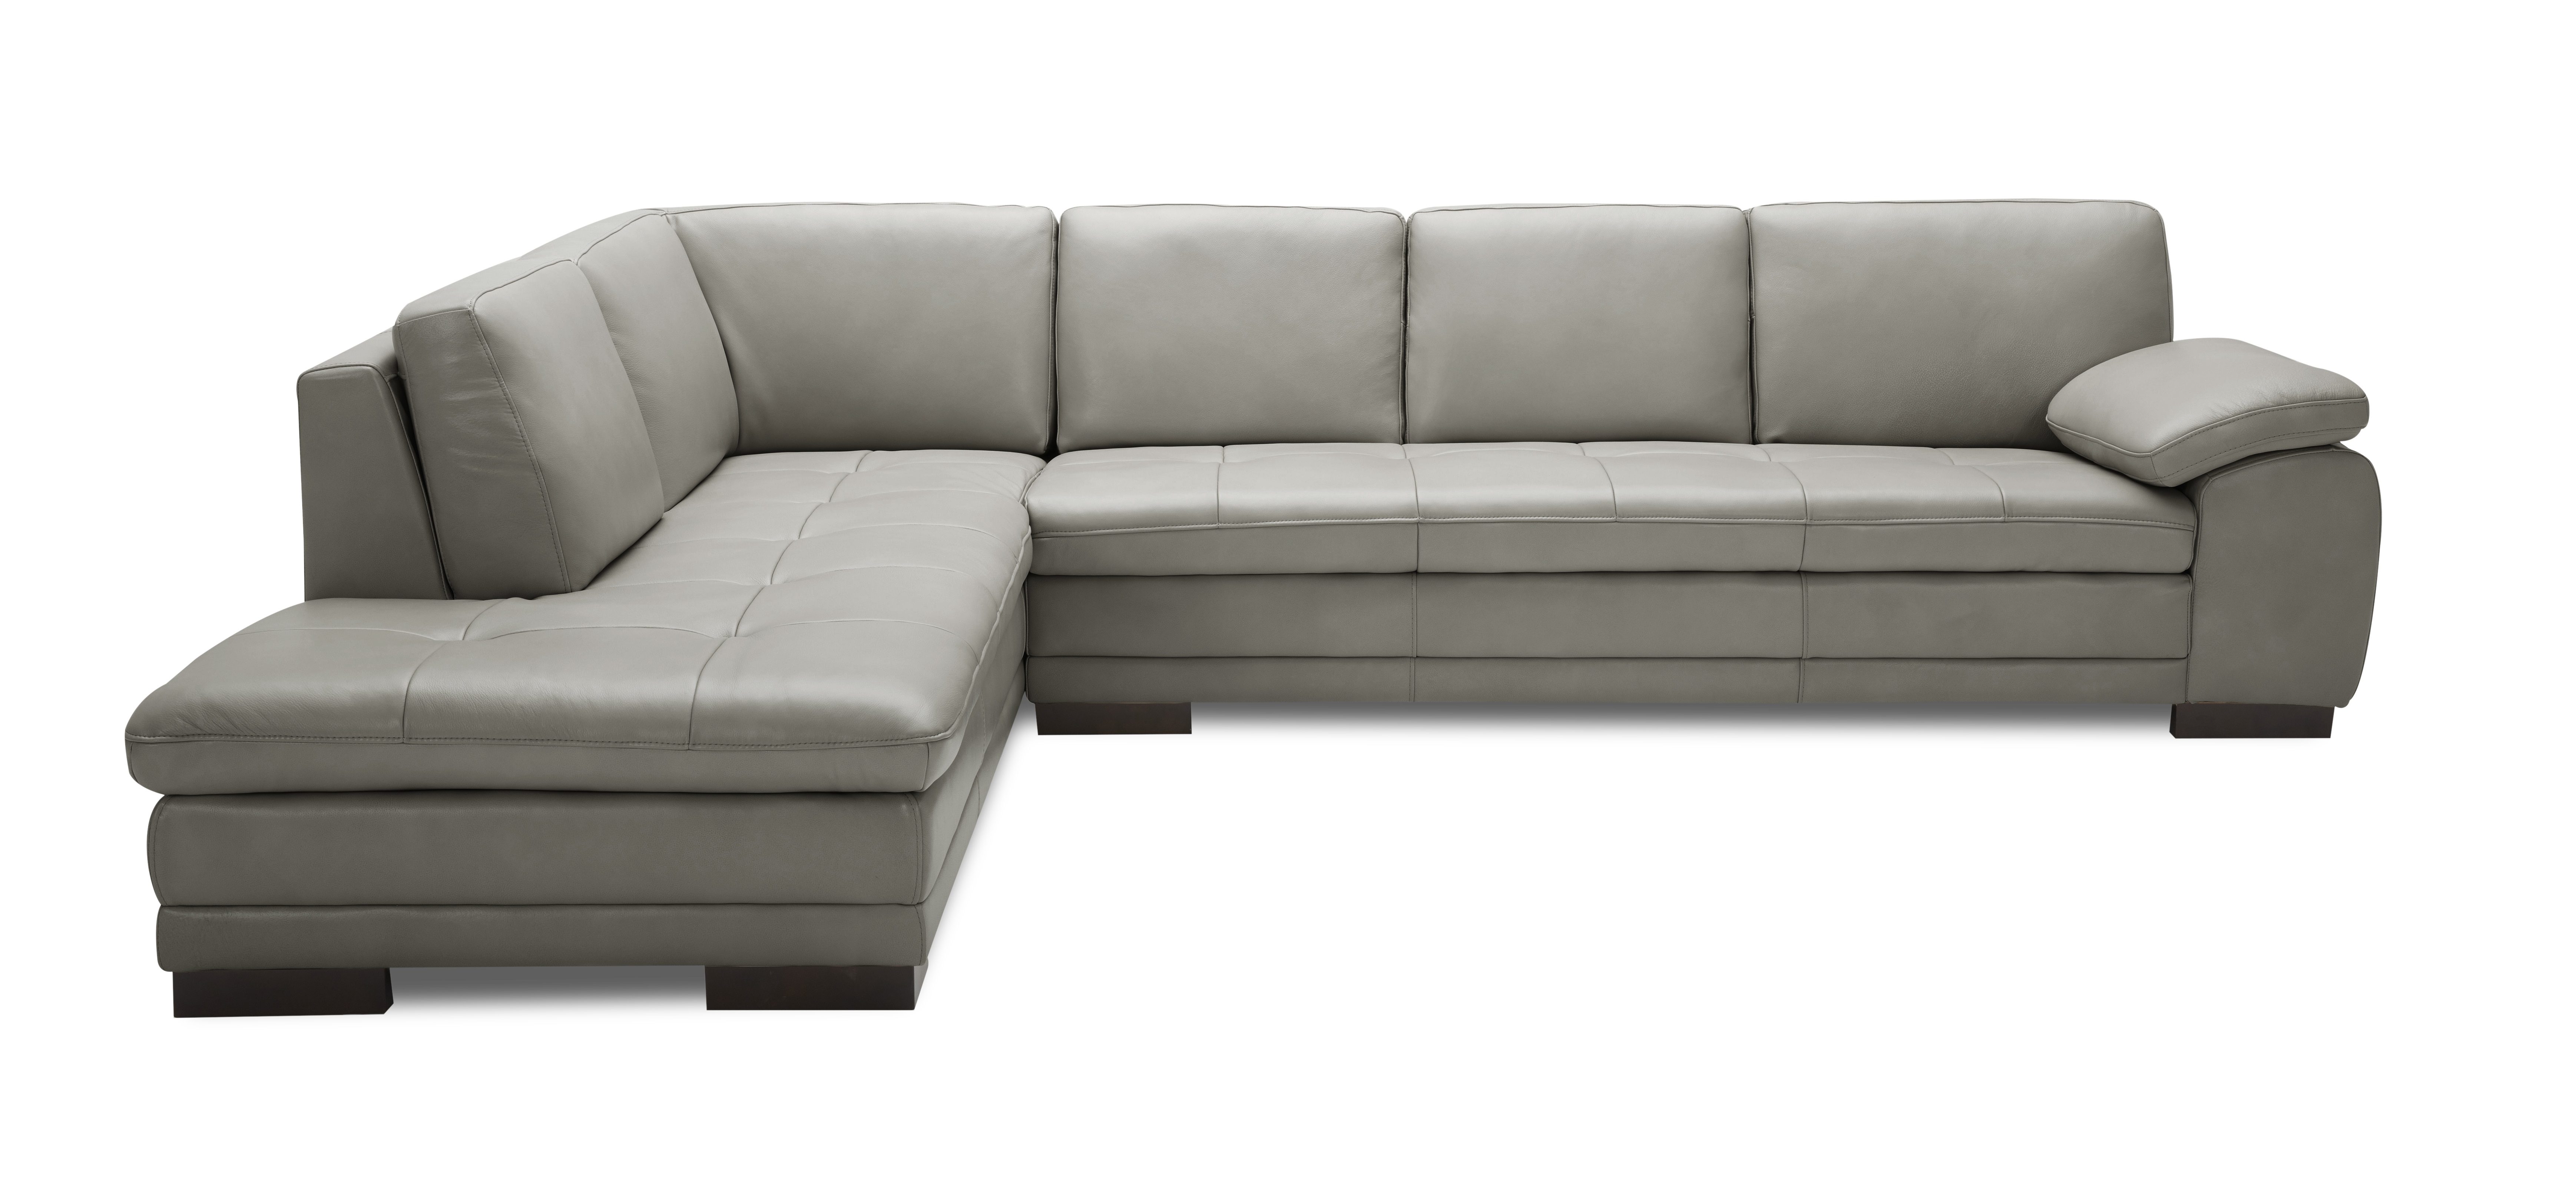 site classichome.com tufted leather sofa sectional